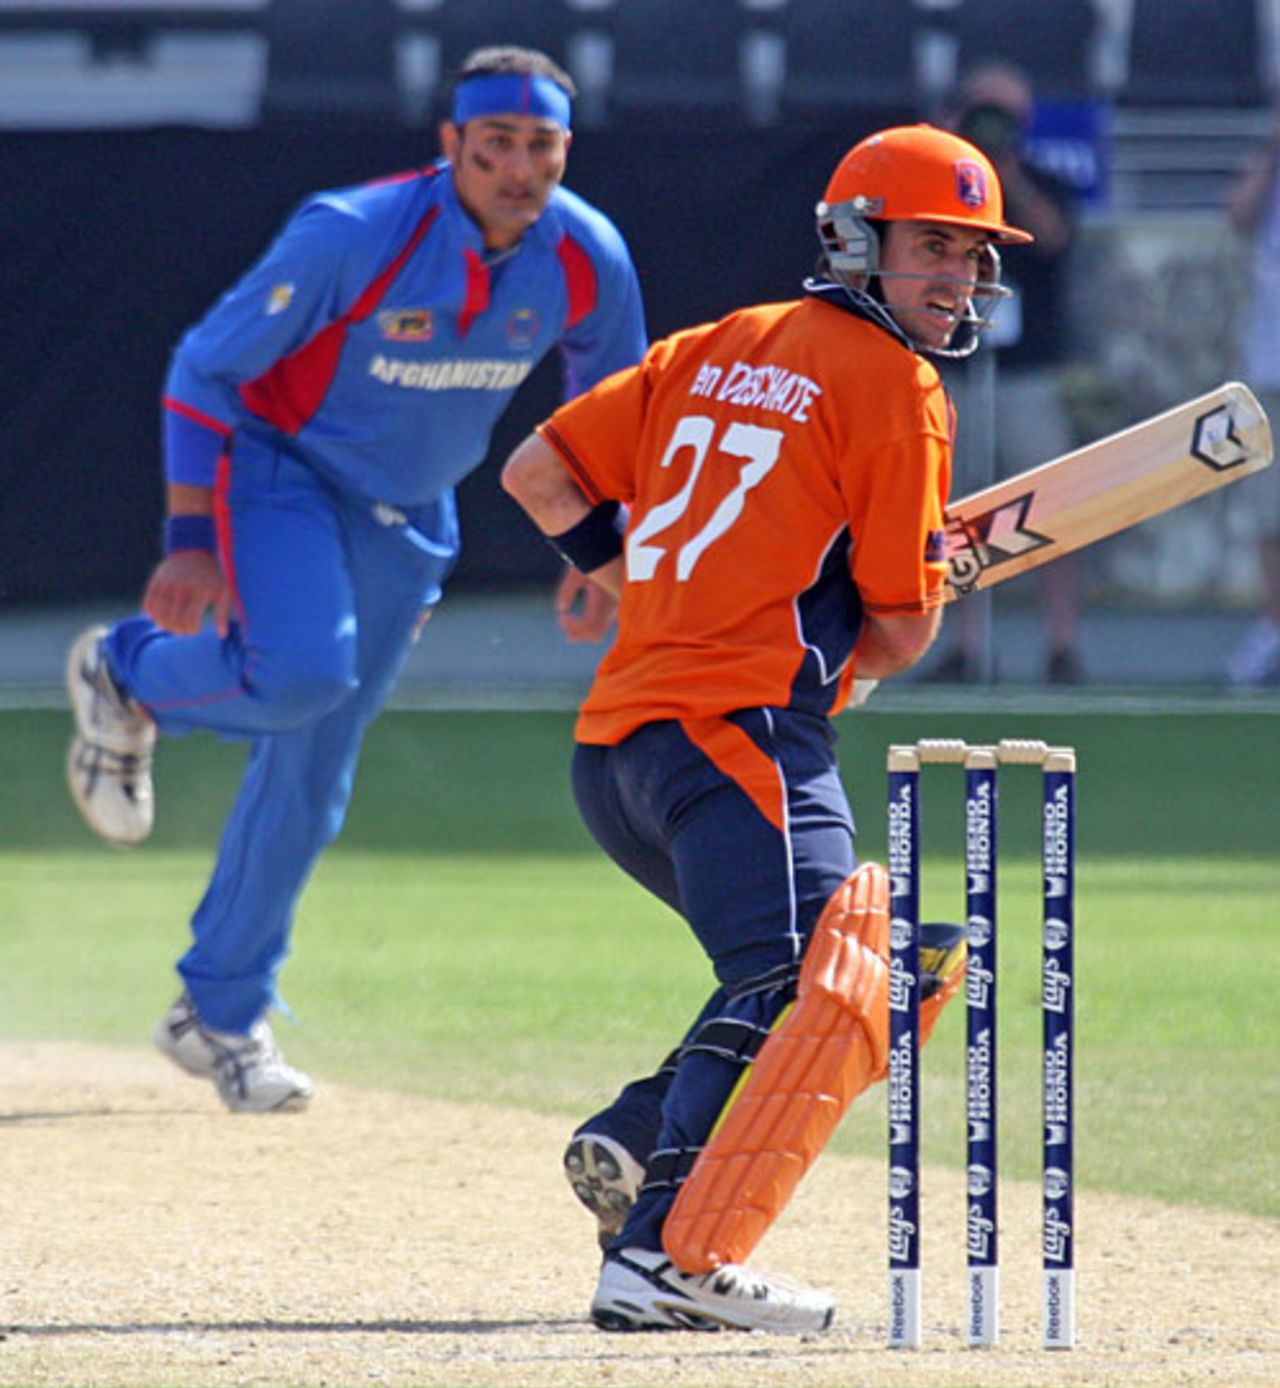 Ryan ten Doeschate guided Netherlands home with the bat, Afghanistan v Netherlands, ICC World Twenty20 Qualifiers, Dubai, February 12, 2010